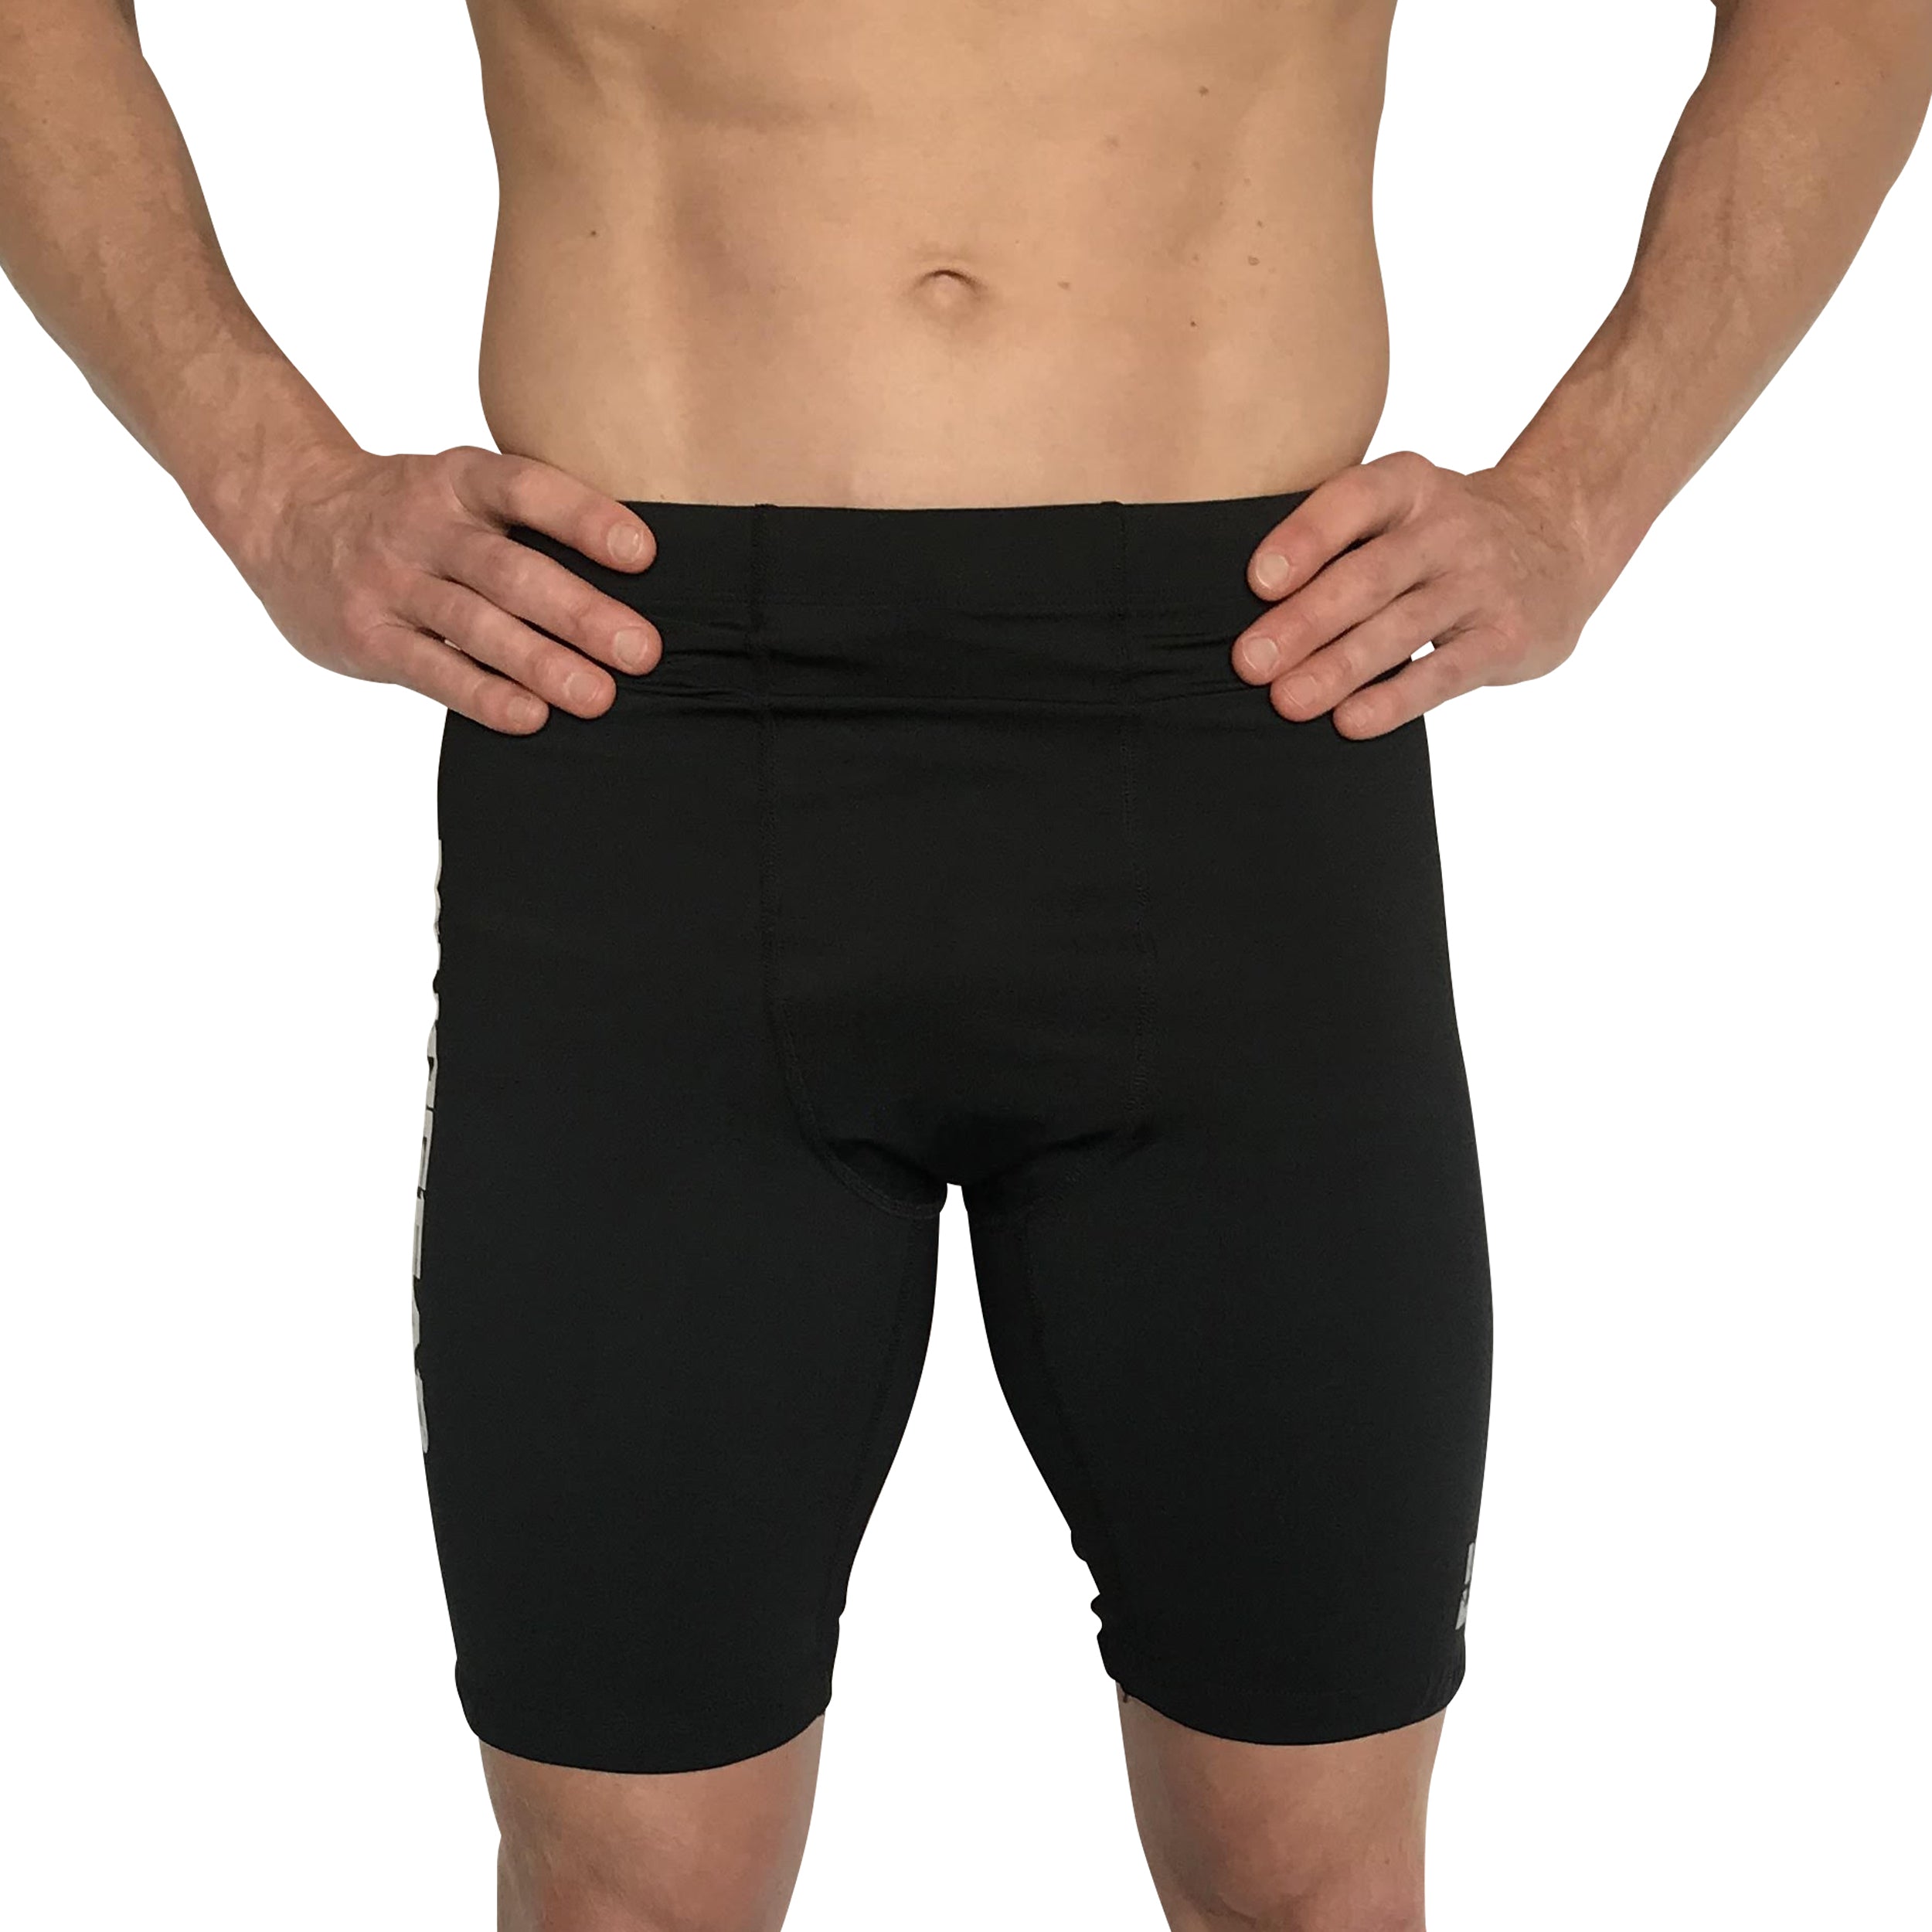 Circulation Compression Shorts Men. Far Infrared Sport Recovery